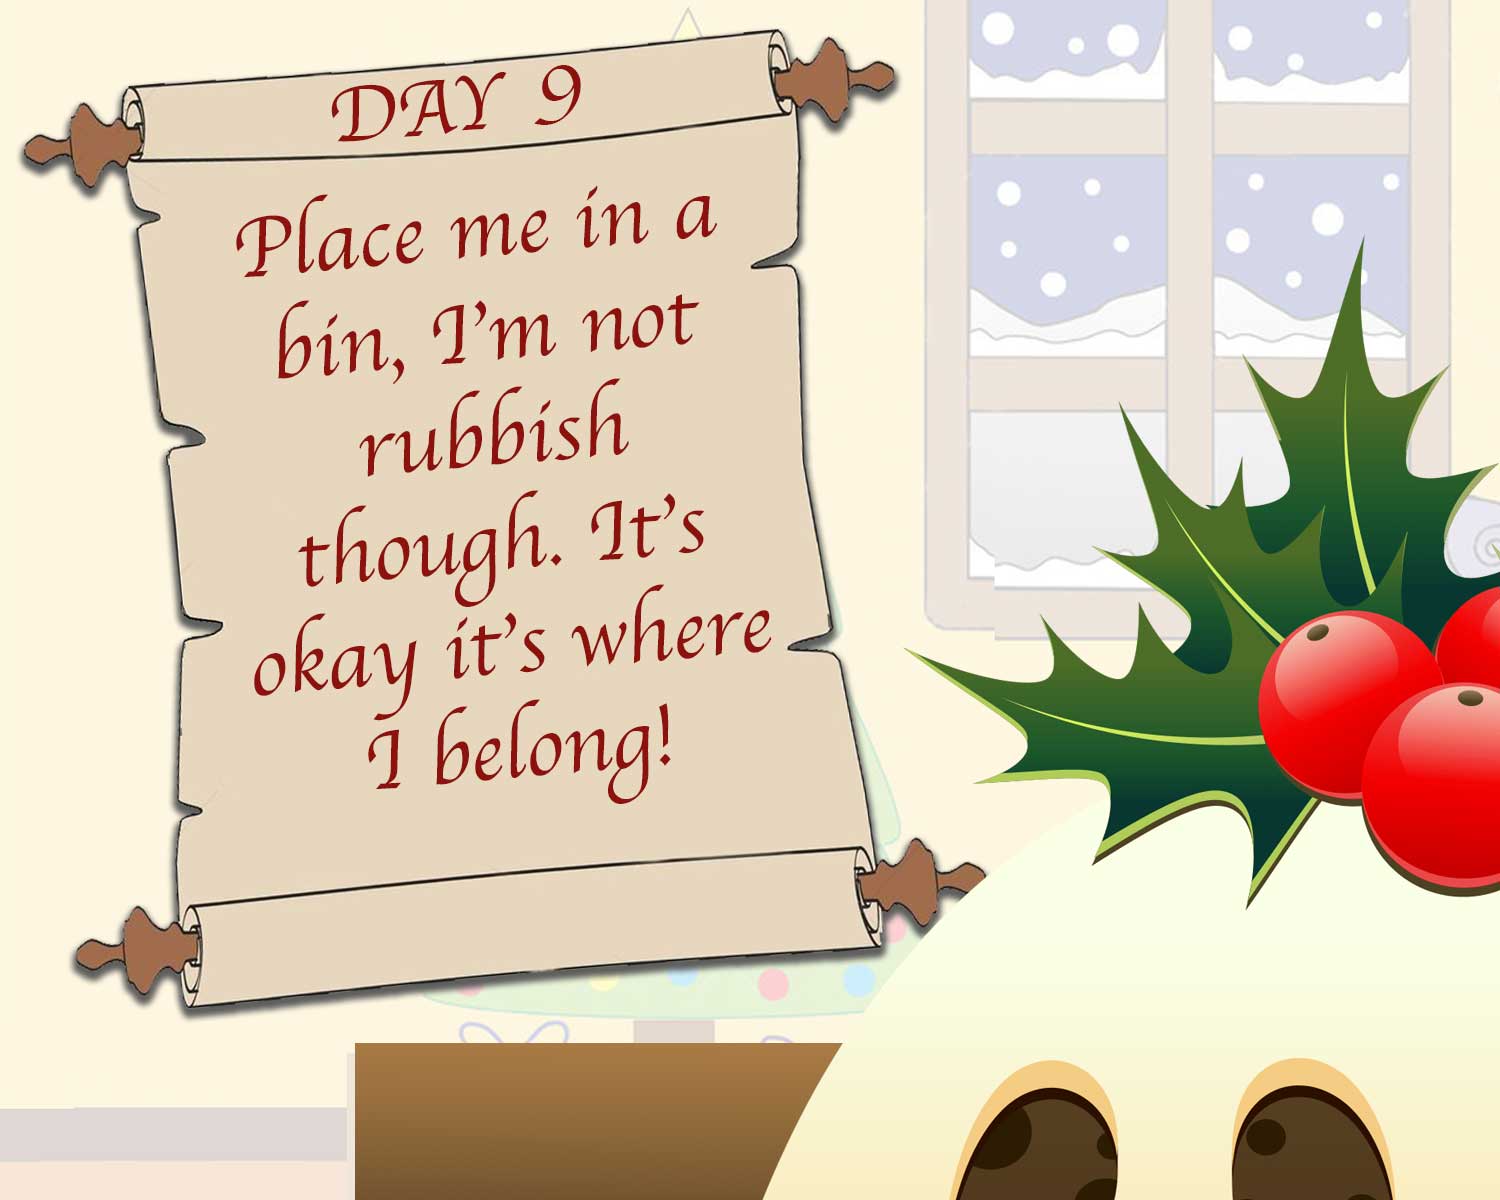 DAY 9 - THE GREAT CHRISTMAS PUDDING HUNT